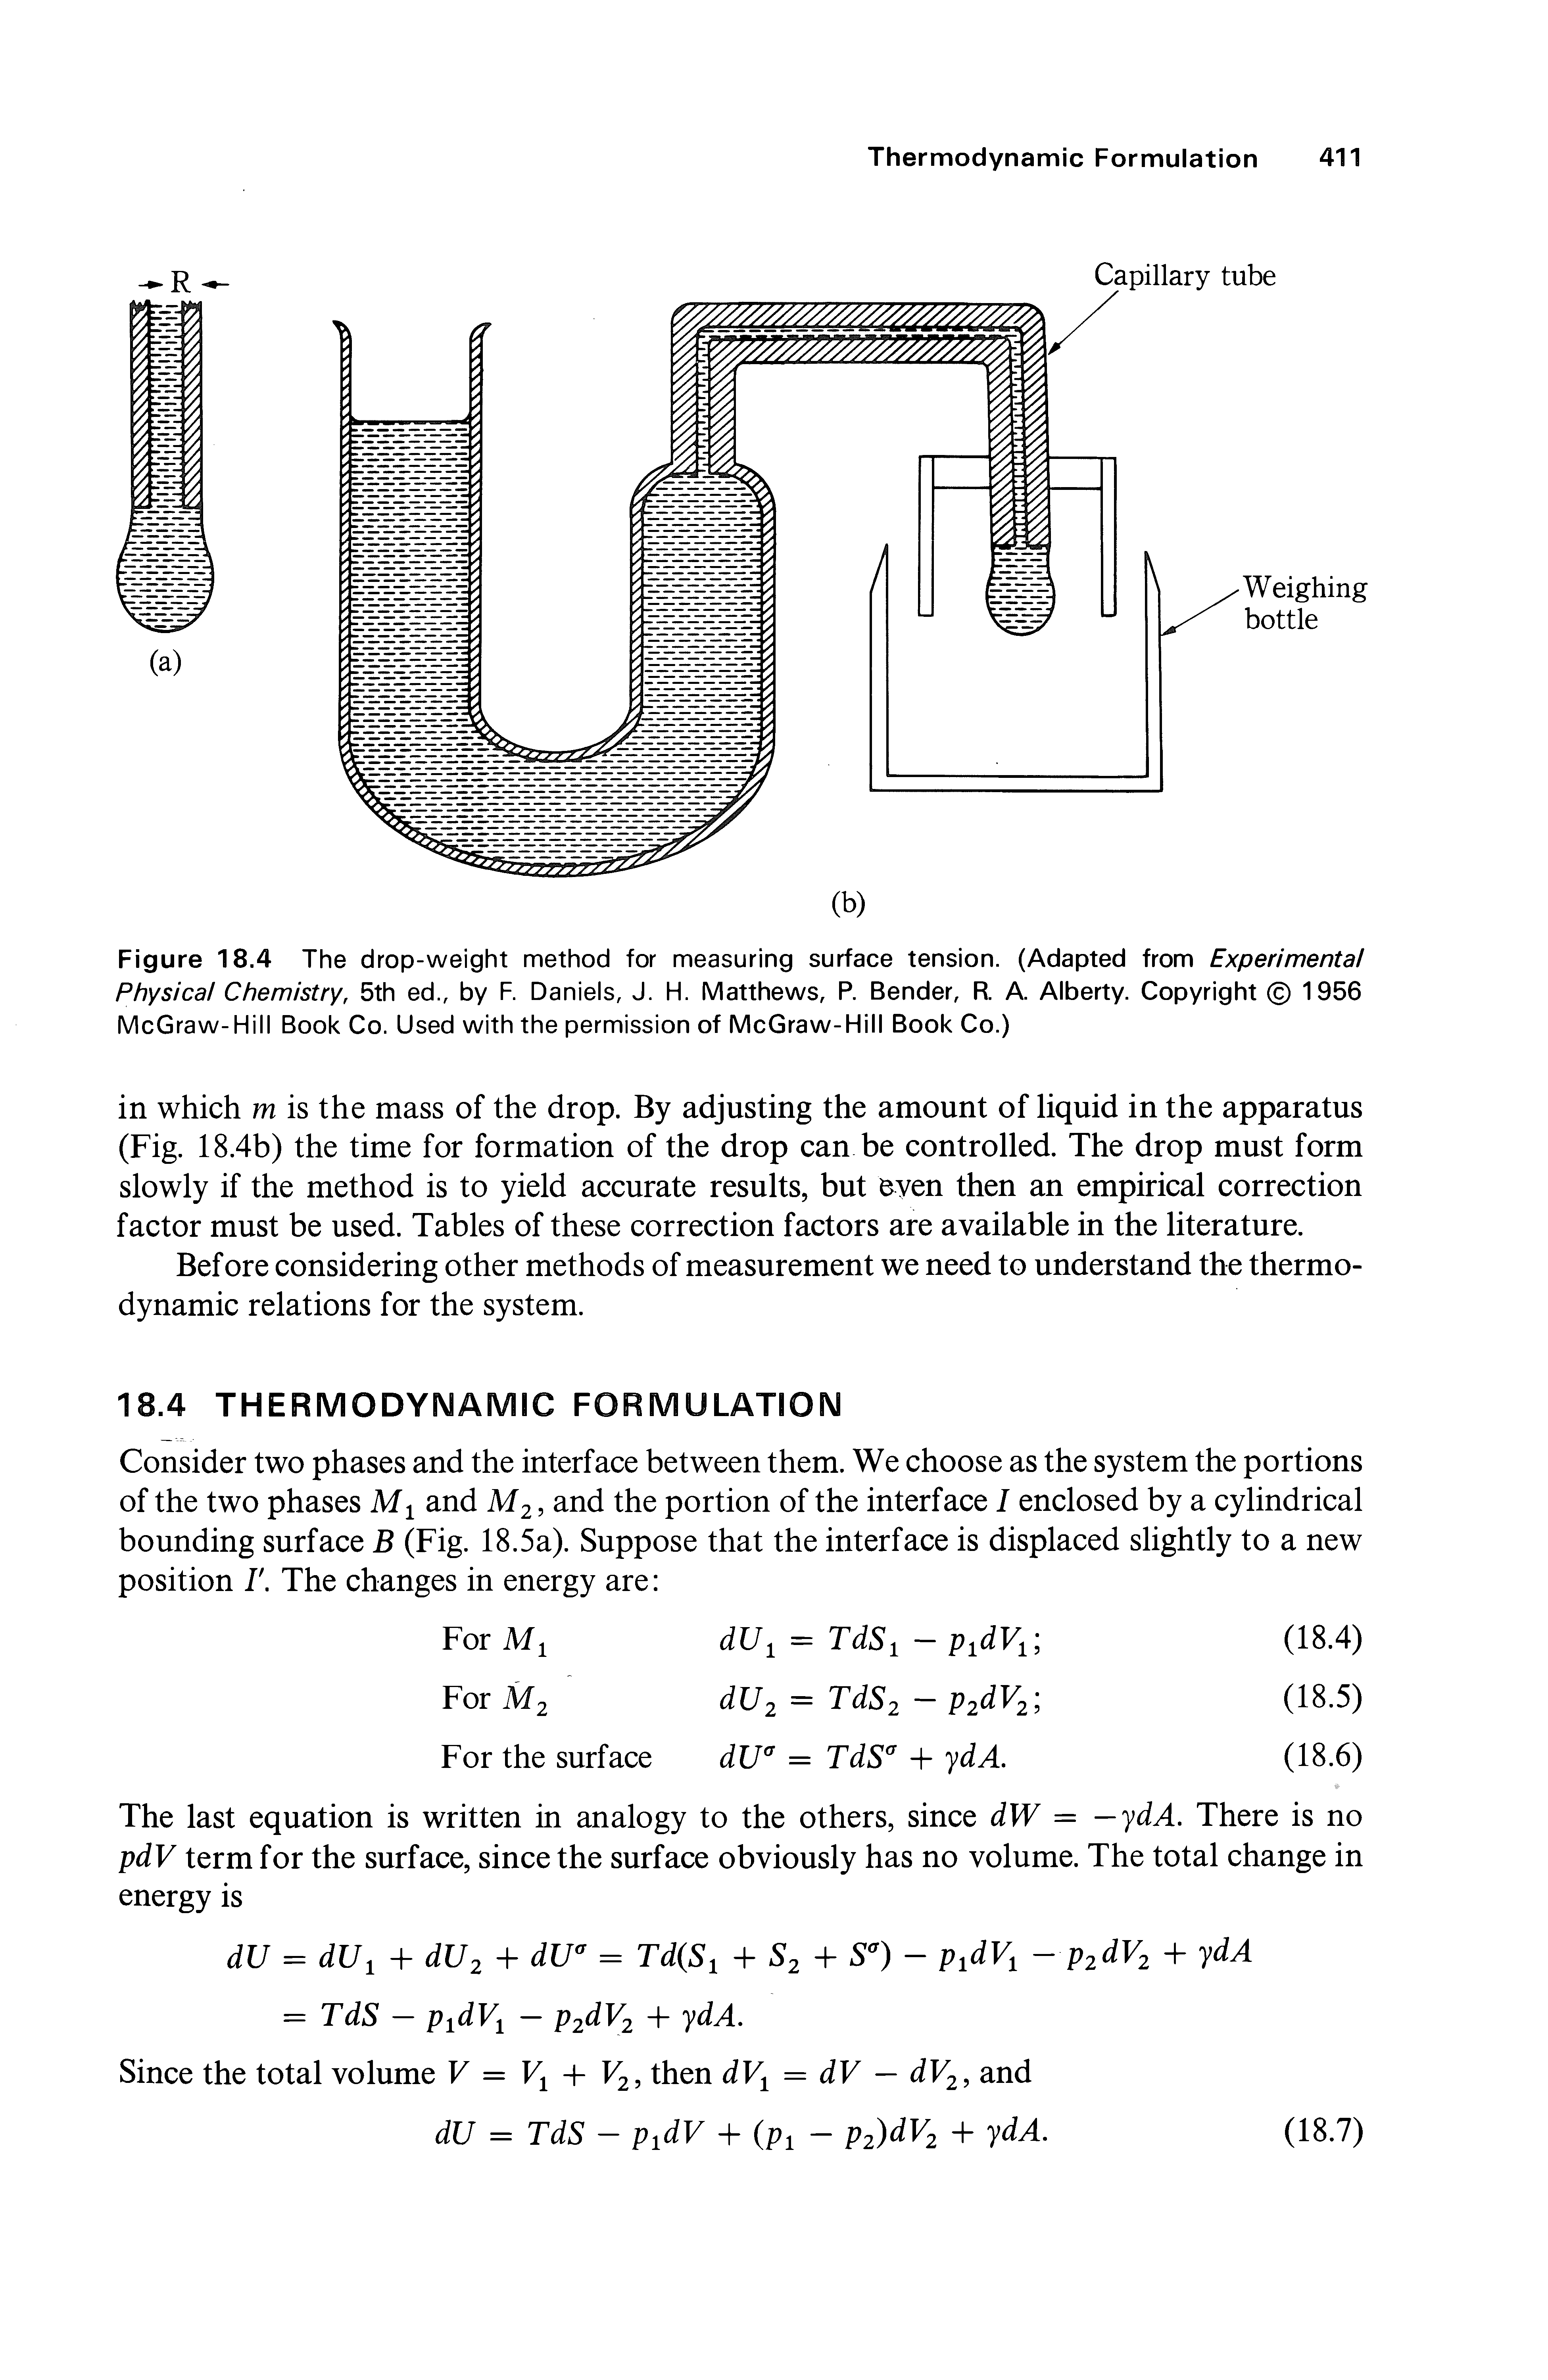 Figure 18.4 The drop-weight method for measuring surface tension. (Adapted from Experimental Physical Chemistry, 5th ed., by F. Daniels, J. H. Matthews, P. Bender, R. A. Alberty. Copyright (c) 1956 McGraw-Hill Book Co. Used with the permission of McGraw-Hill Book Co.)...